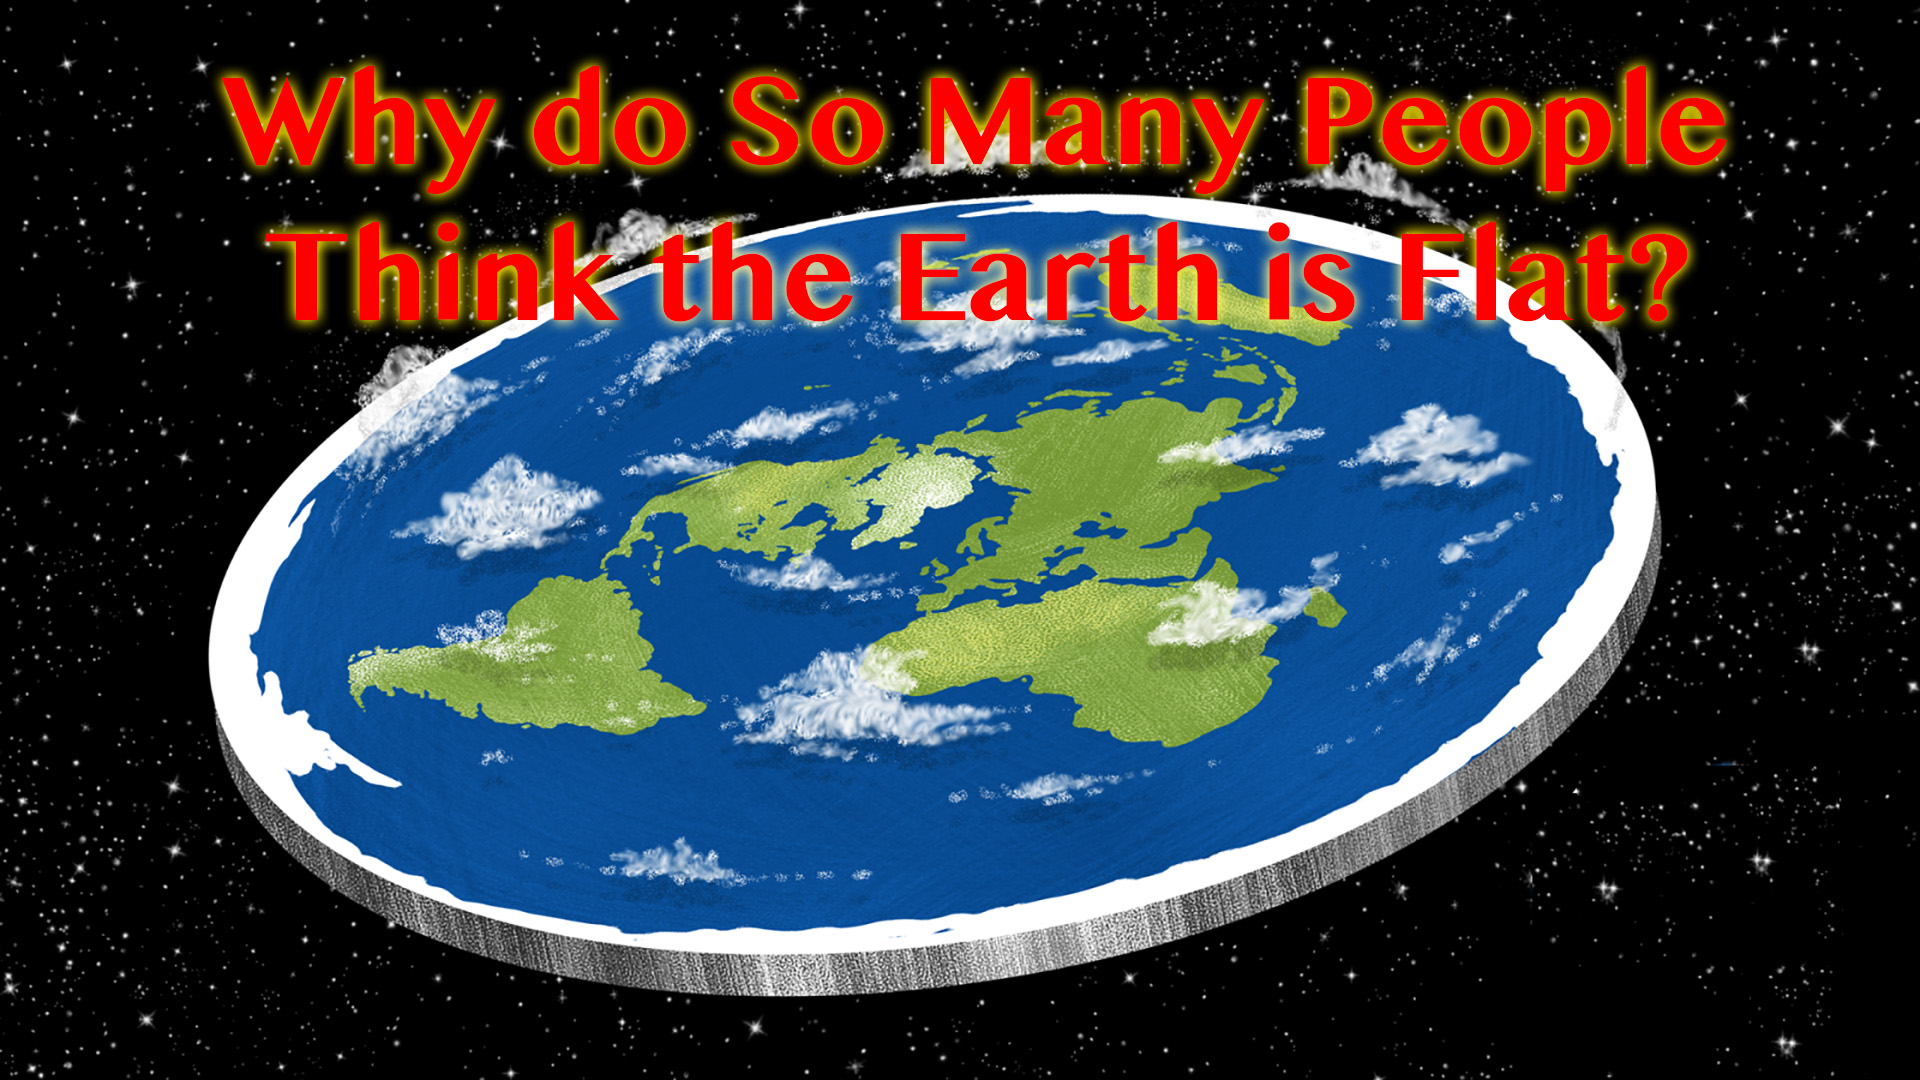 how can people believe the earth is flat